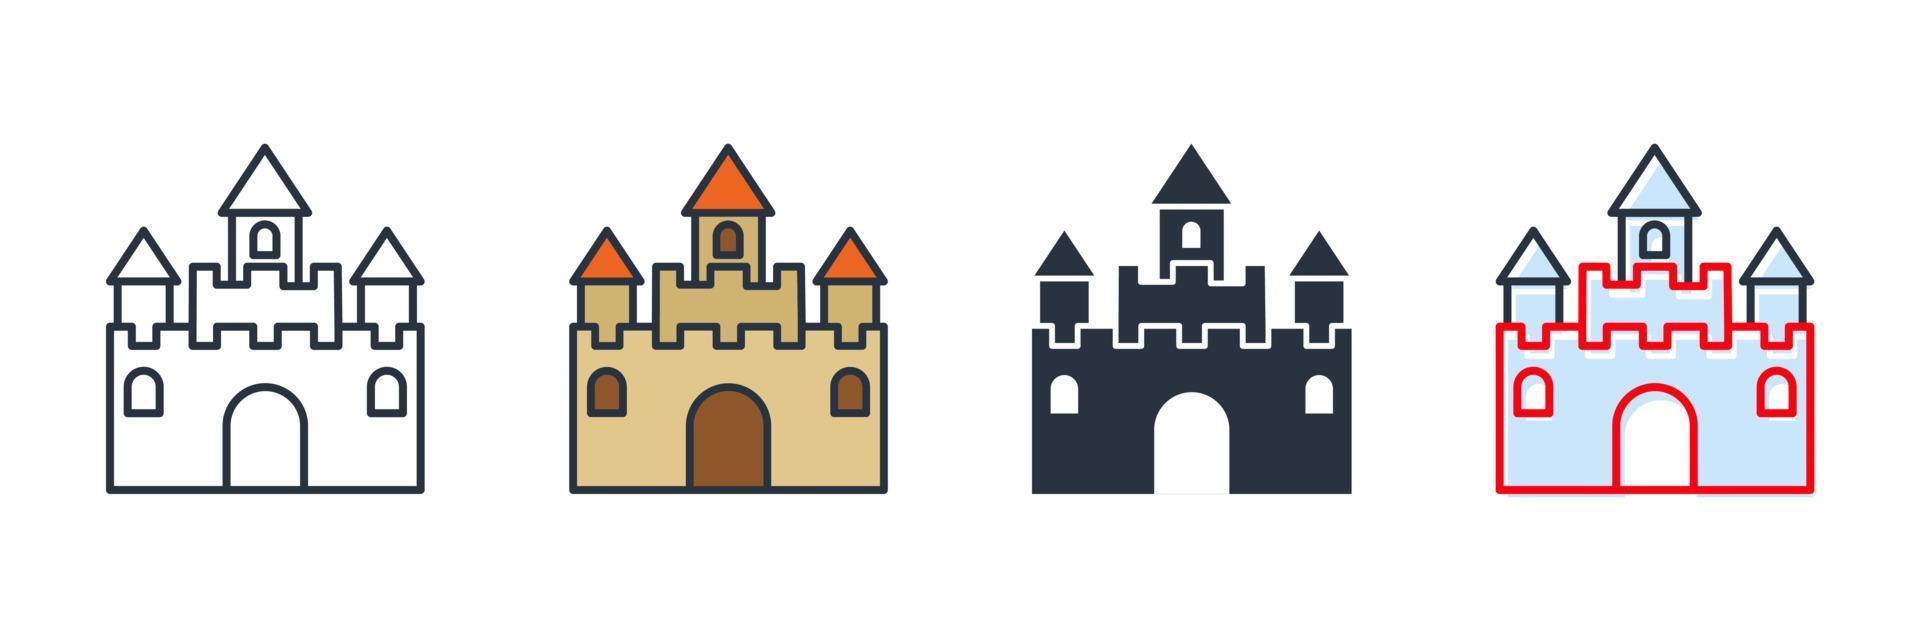 castle building icon logo vector illustration. castle symbol template for graphic and web design collection